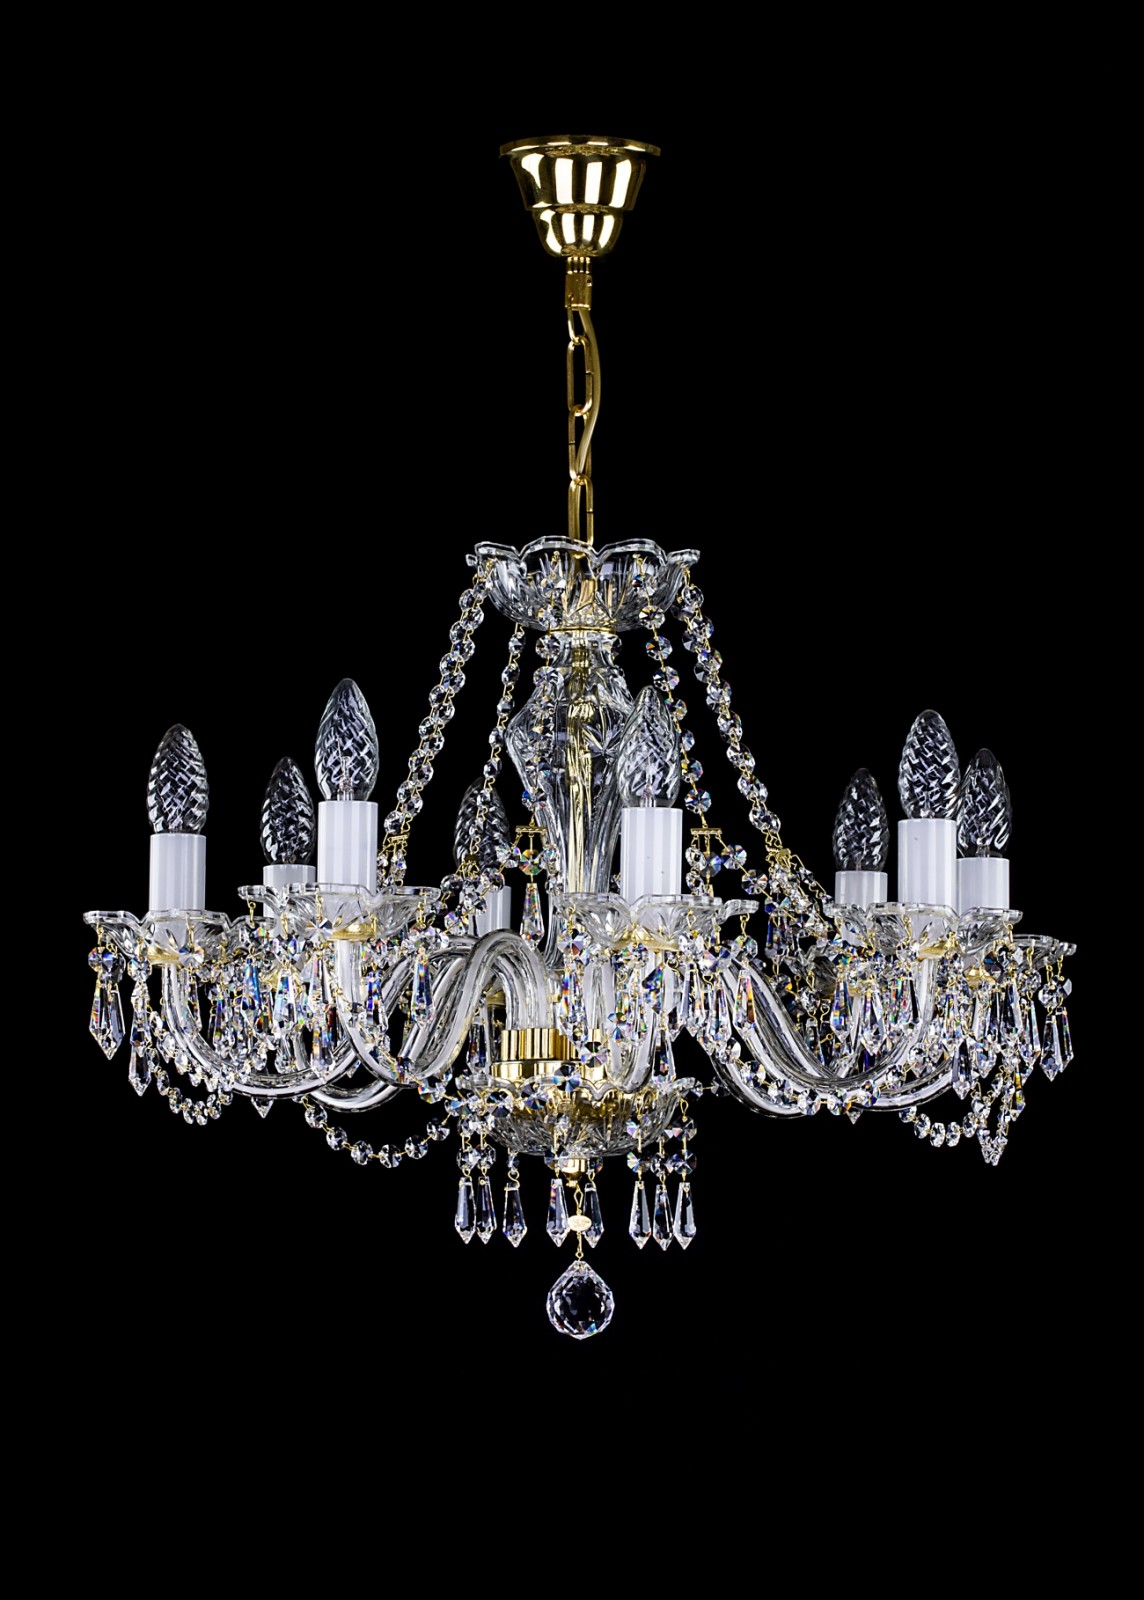 Cut Glass Crystal Chandelier L028ce, What Is A Crystal Chandelier